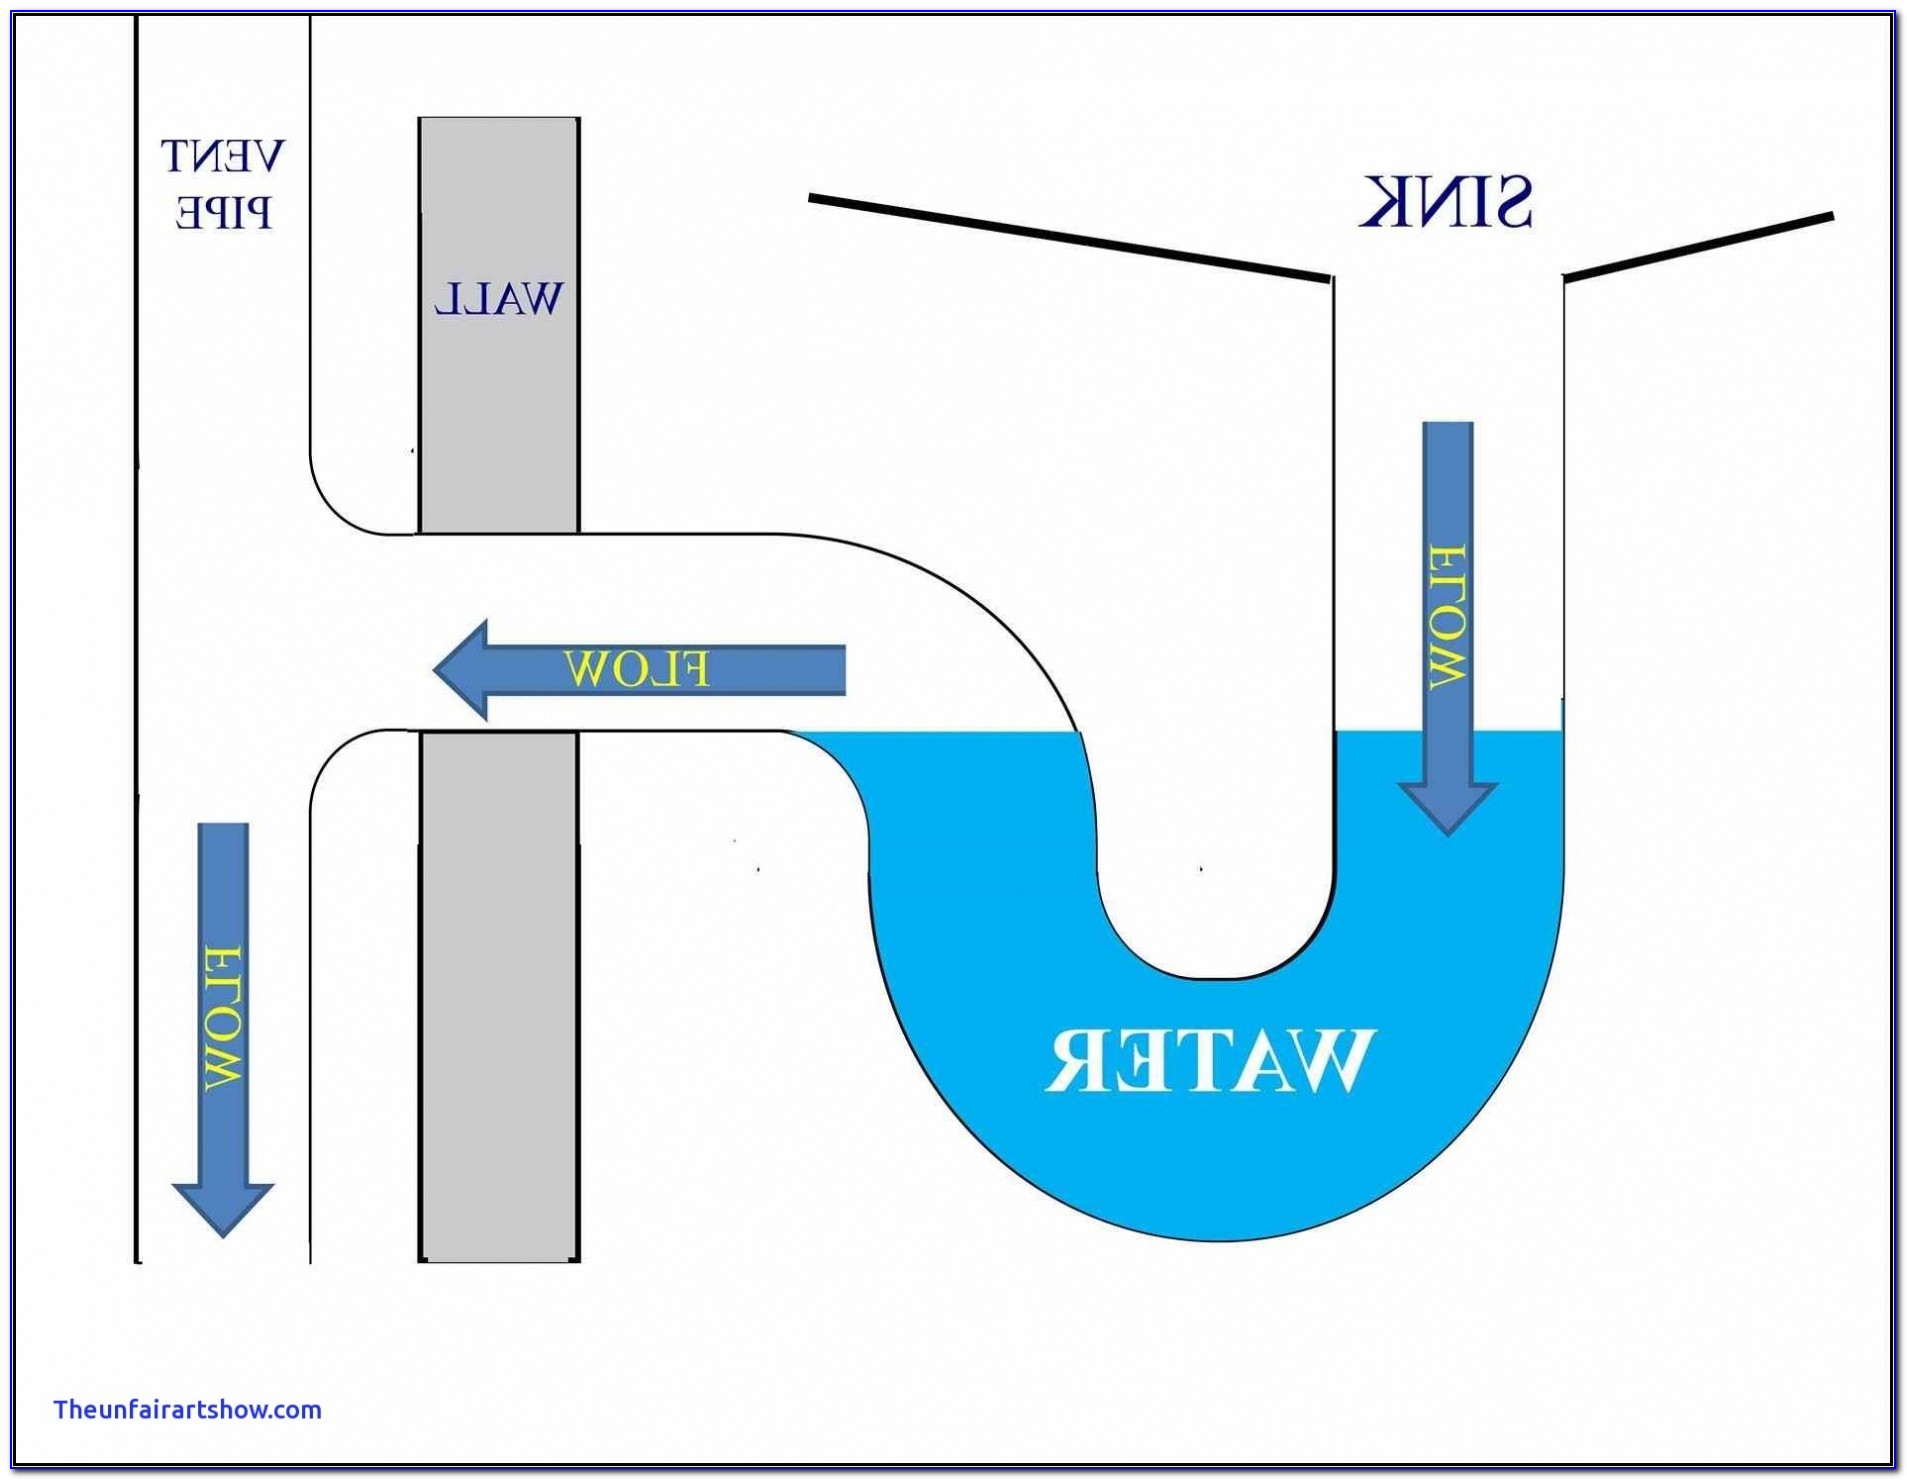 Sewer Line Cleanout Diagram